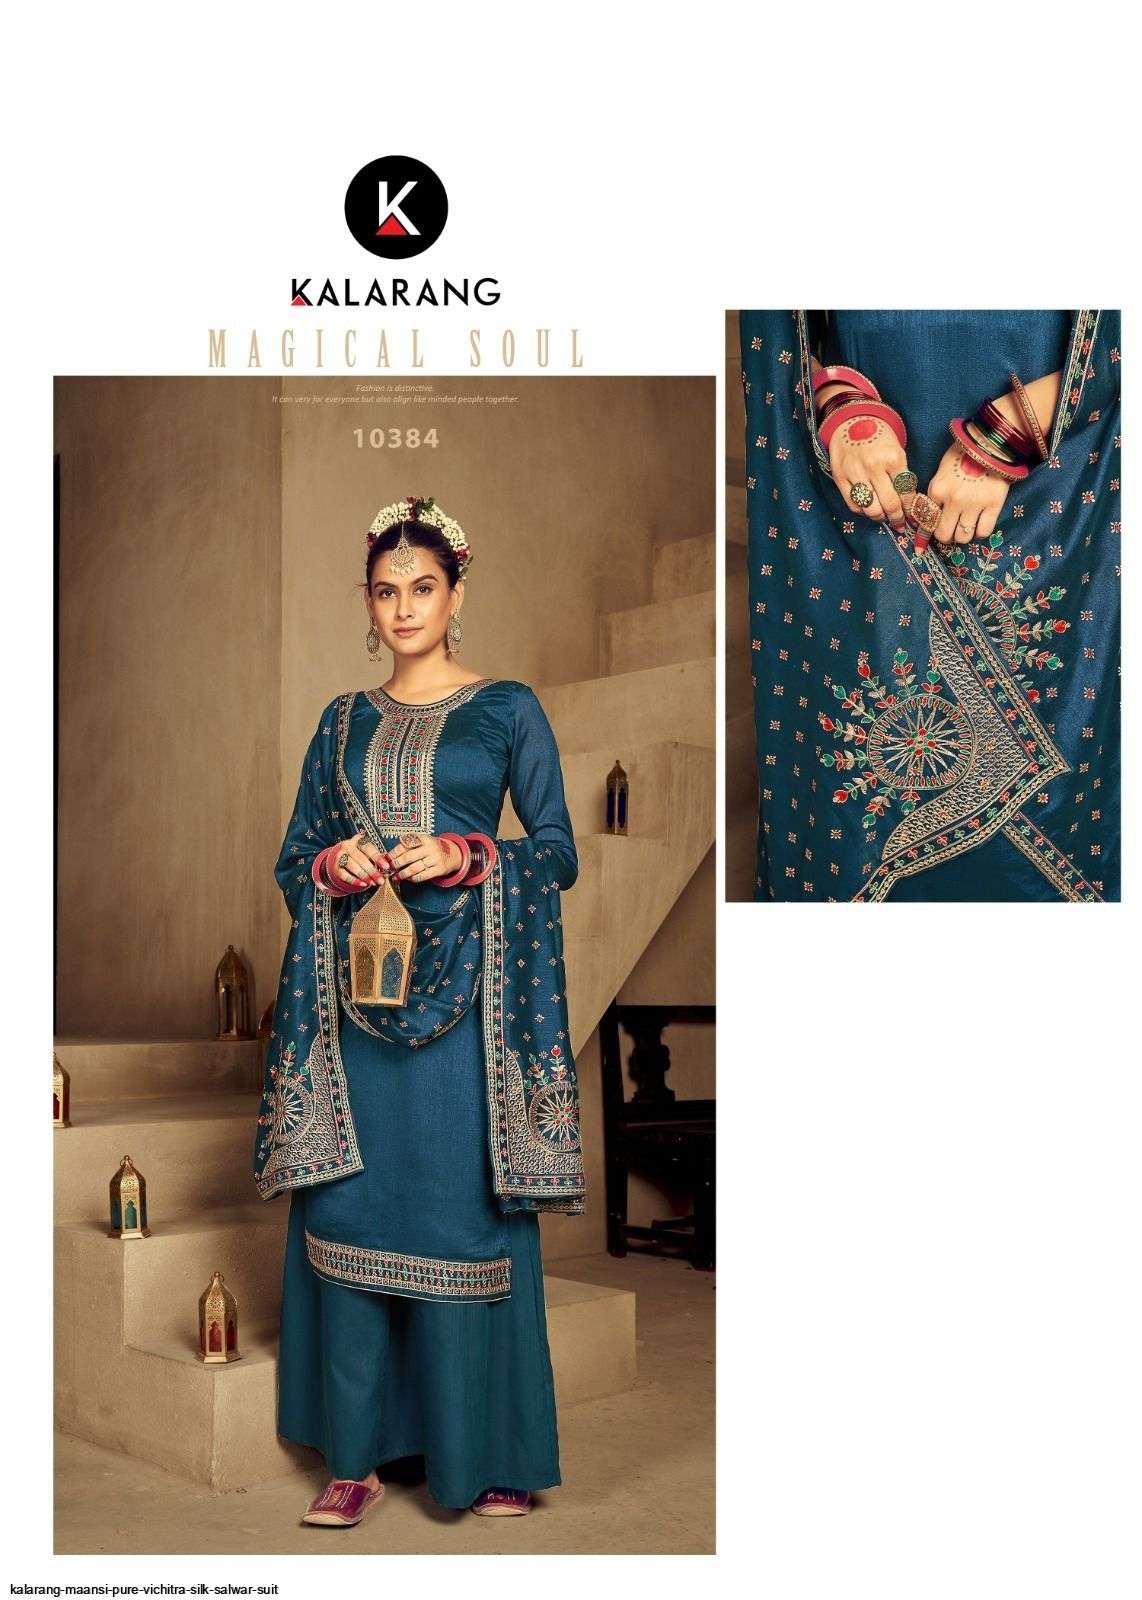 Maansi By Kalarang 10381 To 10386 Series Beautiful Stylish Suits Fancy Colorful Casual Wear & Ethnic Wear & Ready To Wear Pure Vichitra Silk Dresses At Wholesale Price